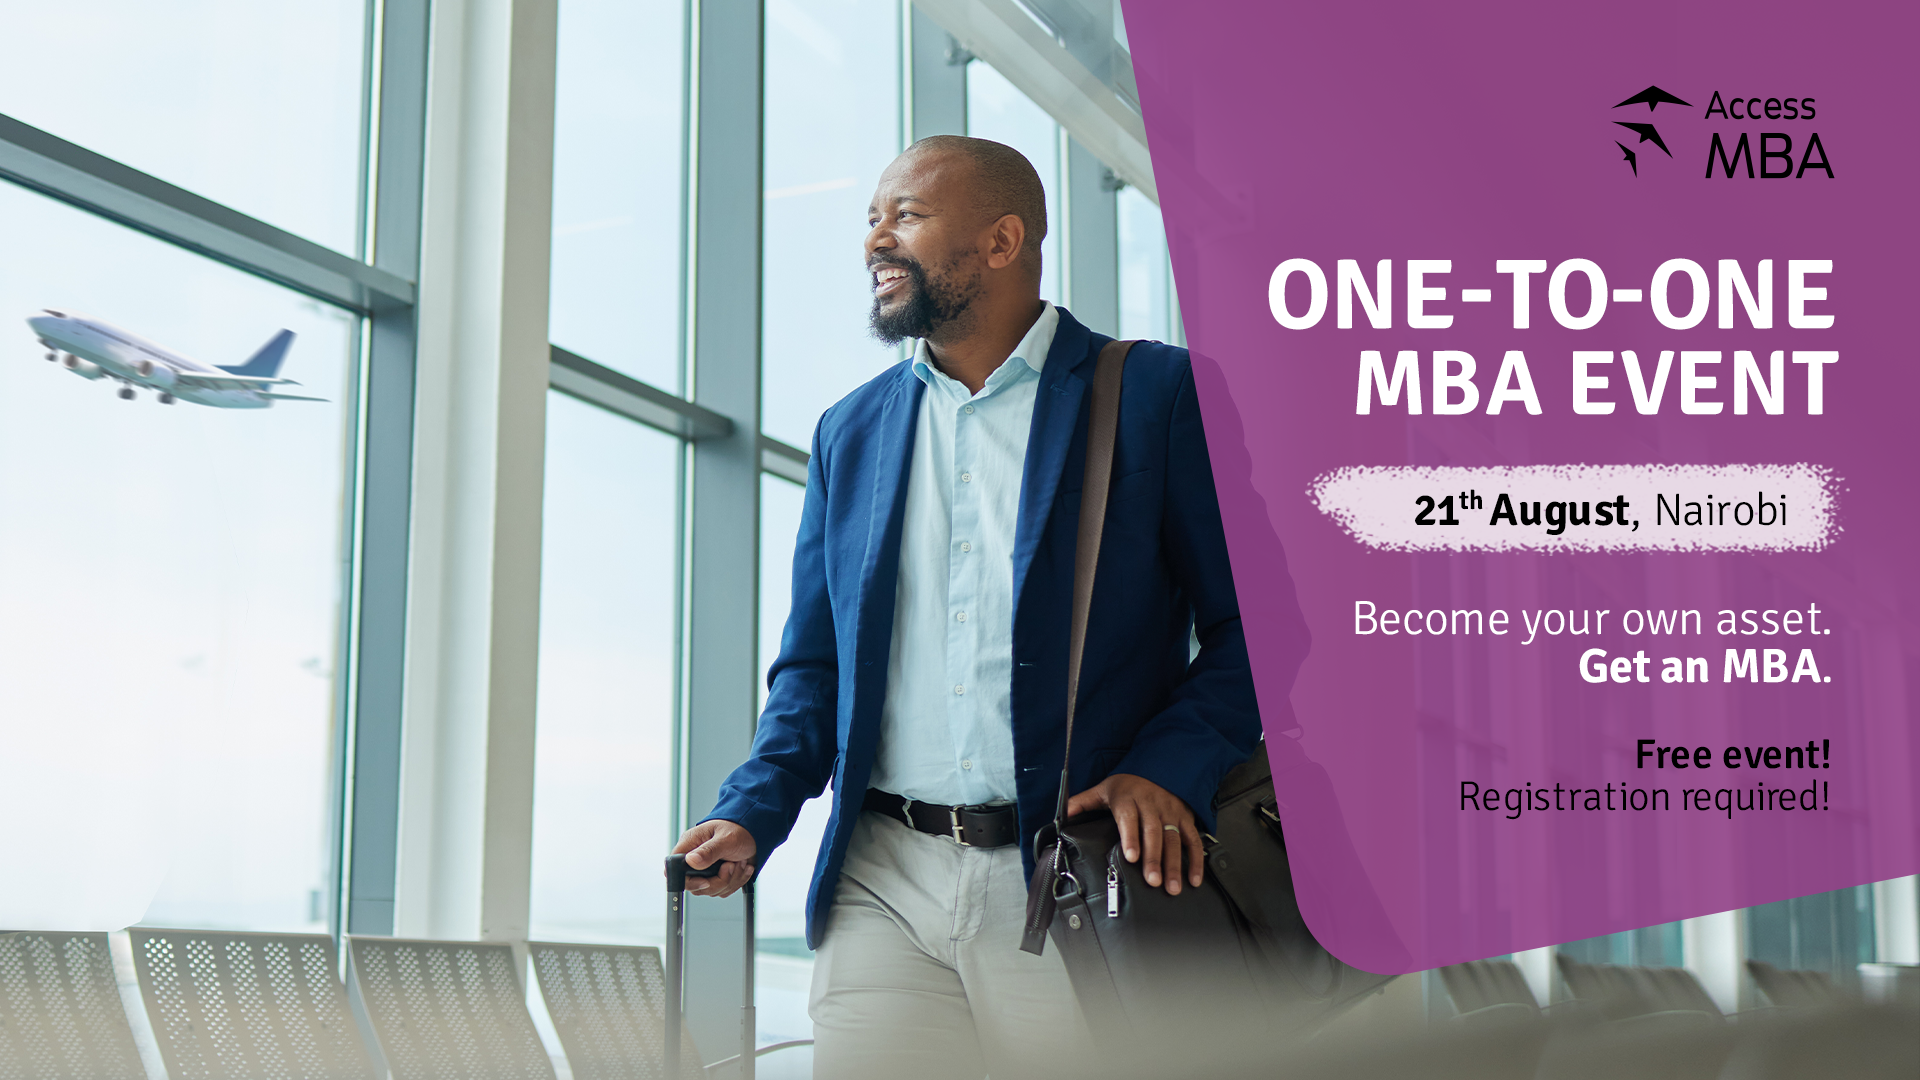 INVEST IN YOUR GROWTH! MEET YOUR DREAM UNIVERSITIES AT THE FREE ACCESS MBA IN-PERSON EVENT IN NAIROBI, Nairobi, Kenya